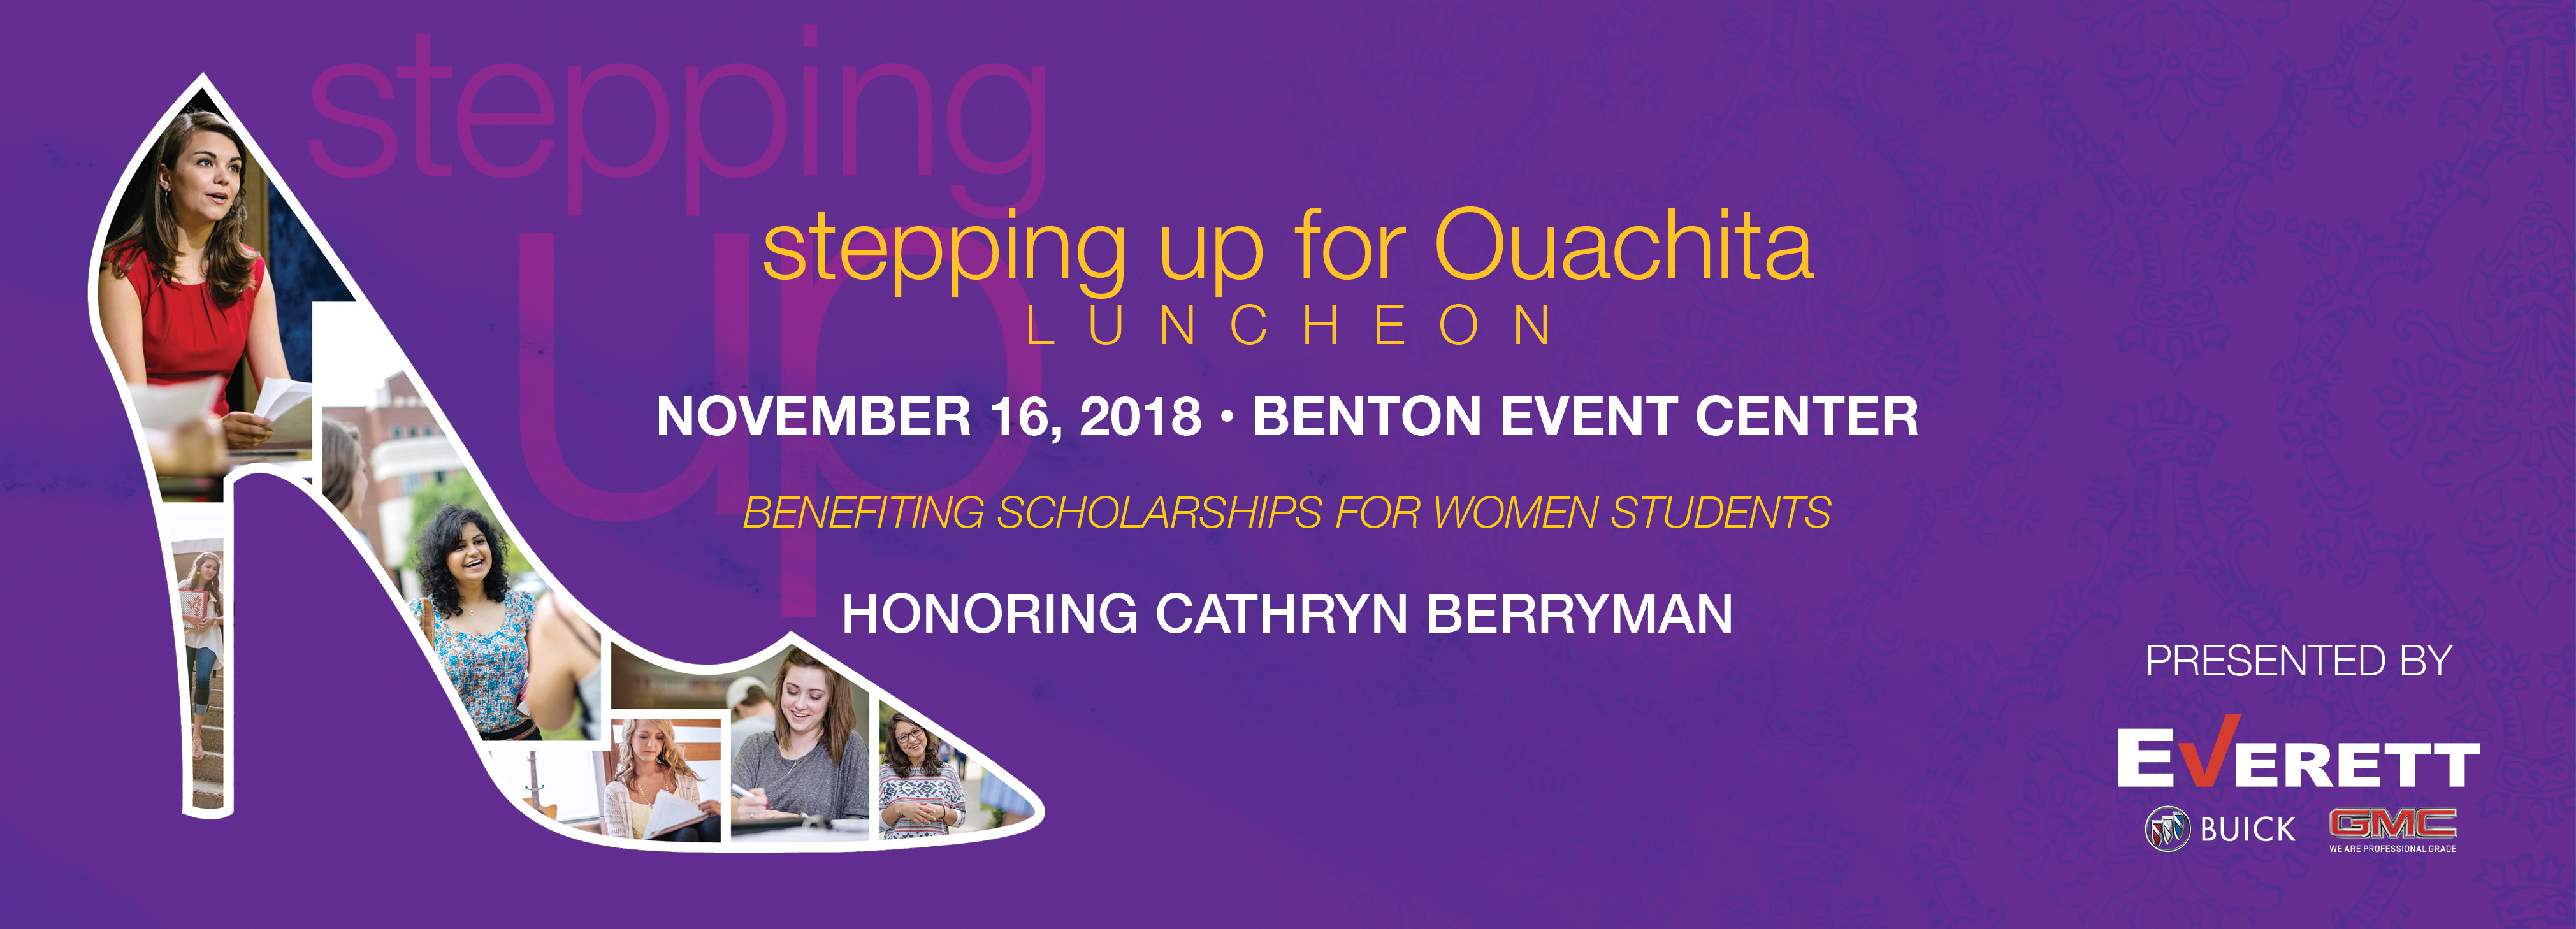 Cathryn Berryman to be honored Nov. 16 at Stepping Up for Ouachita.